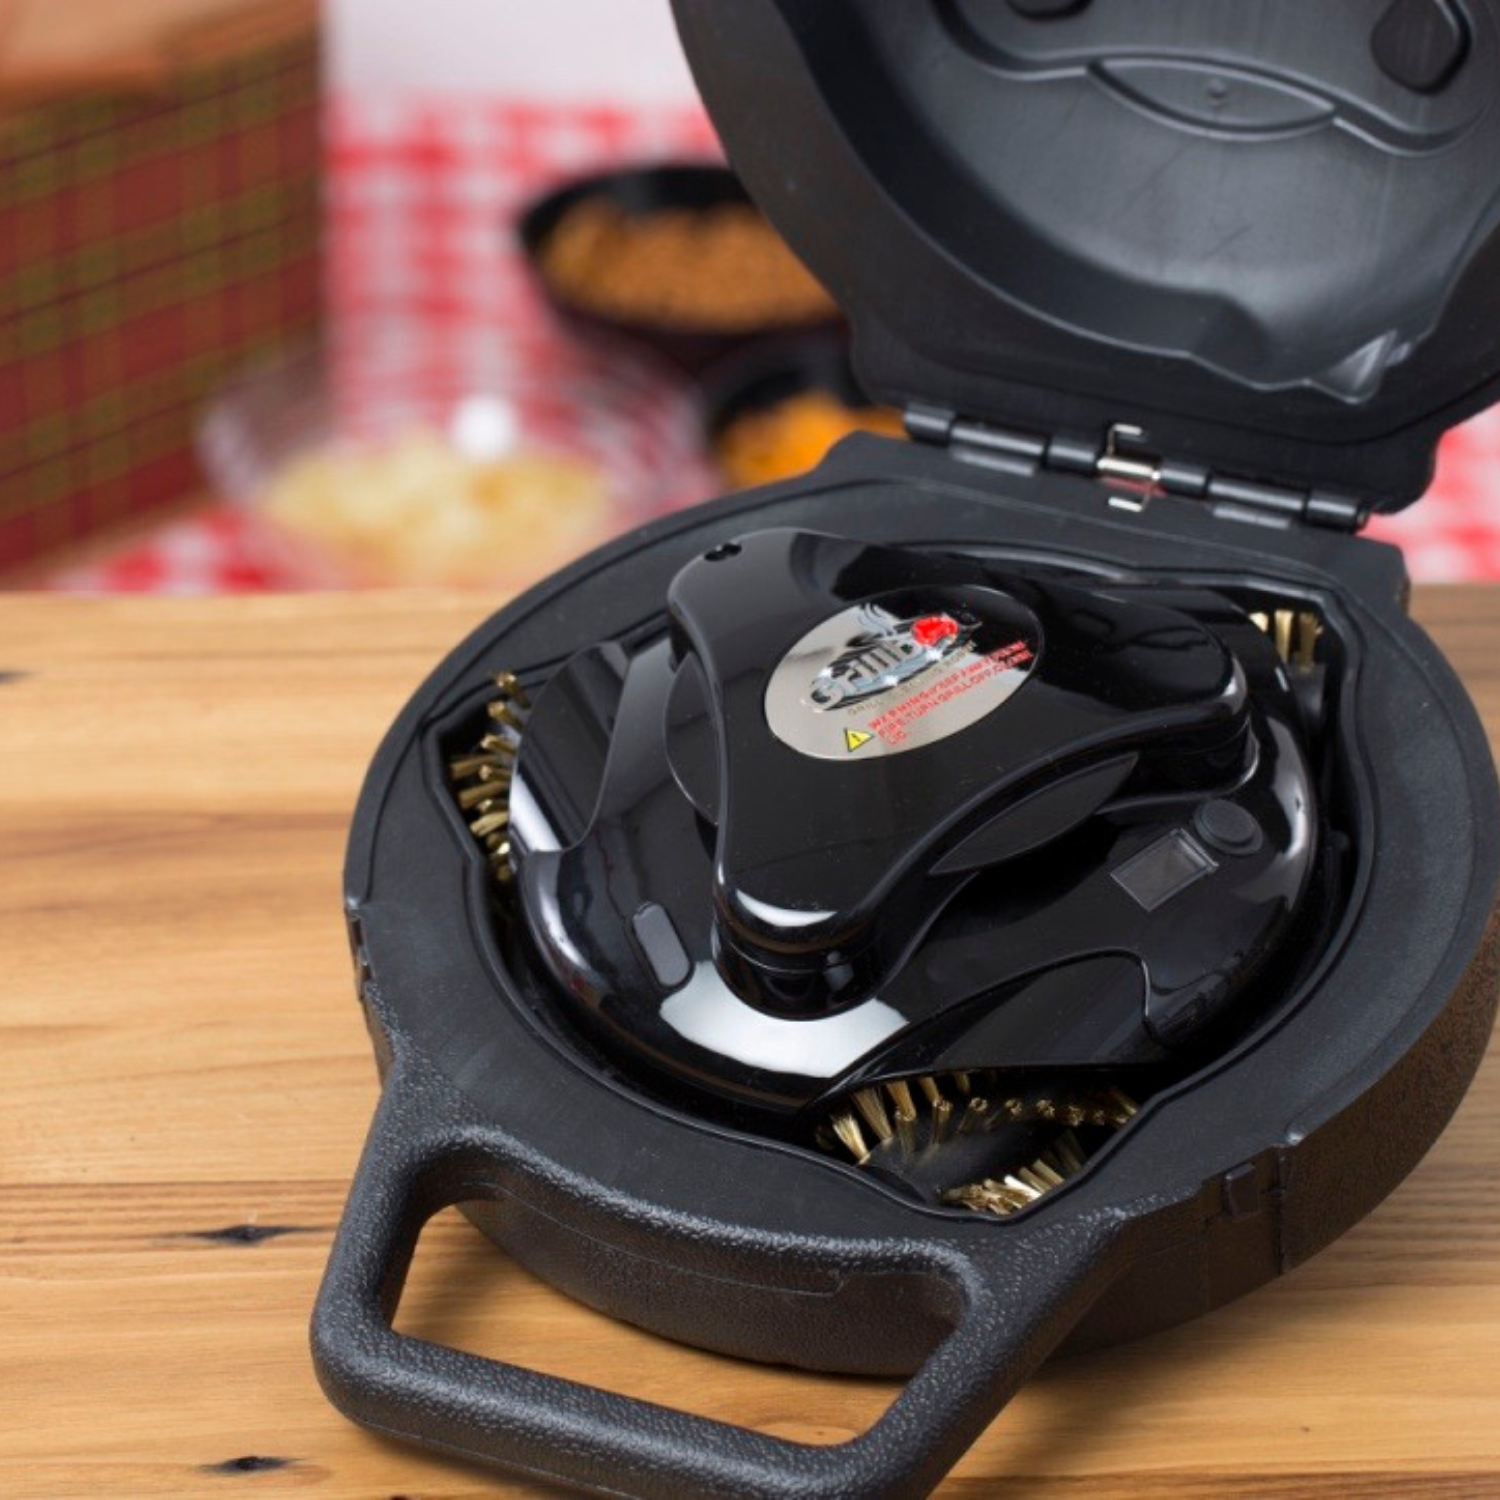 Grillbot: The Robot that Cleans Your Grill